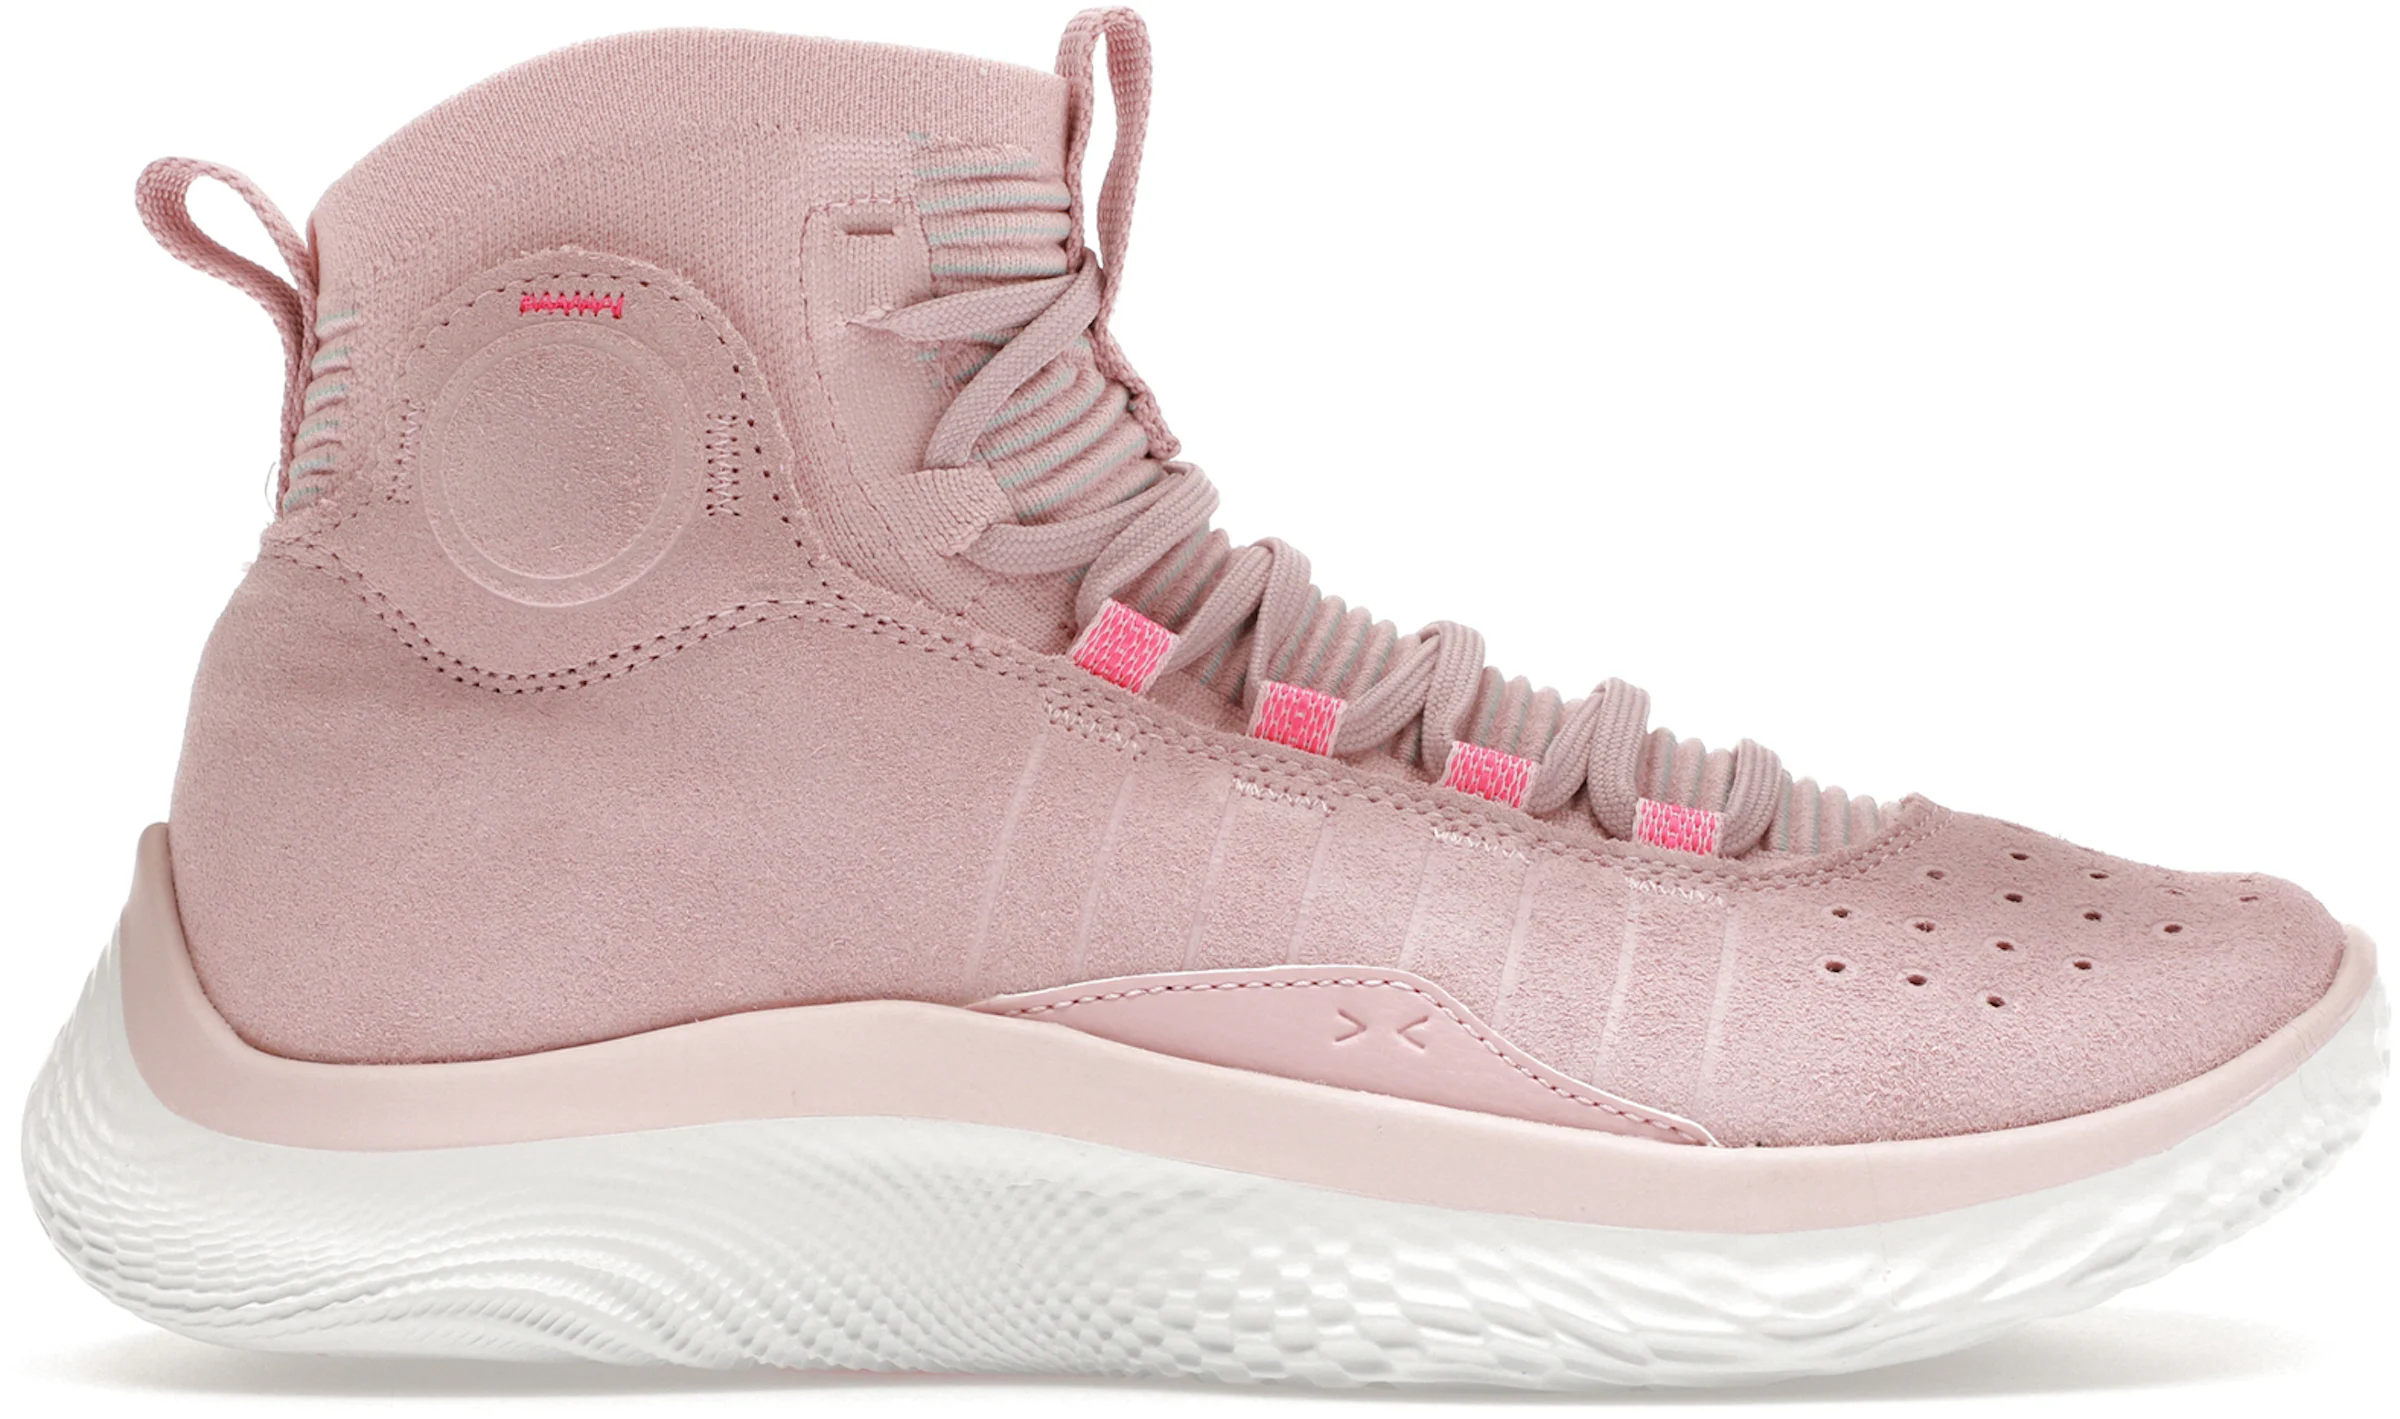 Under Armour Curry 4 Flotro Pink Men's - 3024861-600 - US